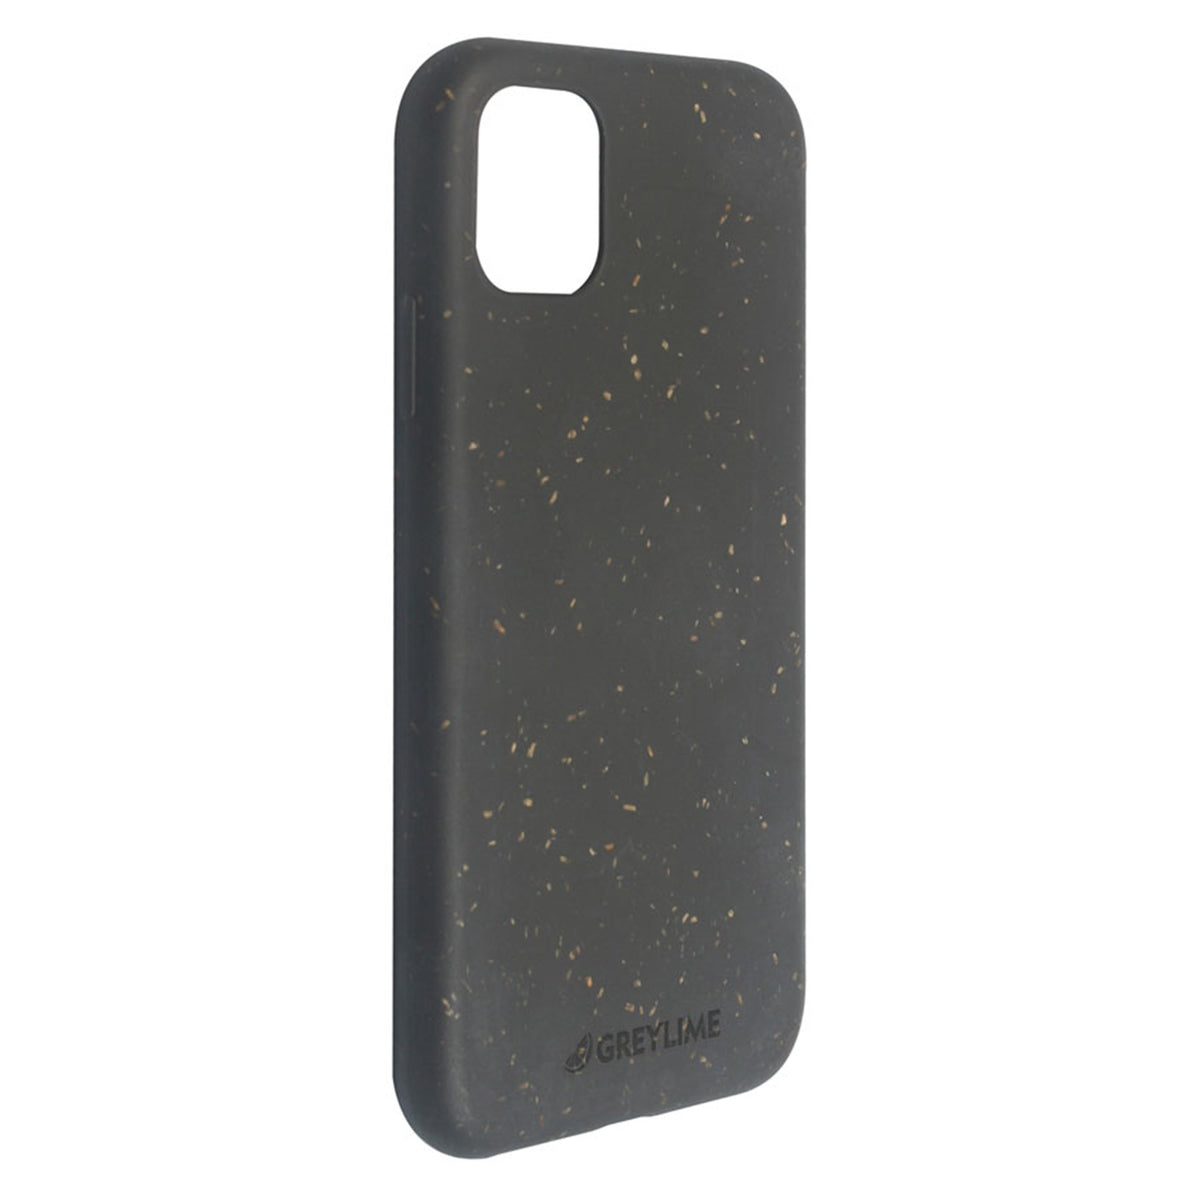 COIP1109 Greylime Iphone 11 Biodegradable Cover Black 3